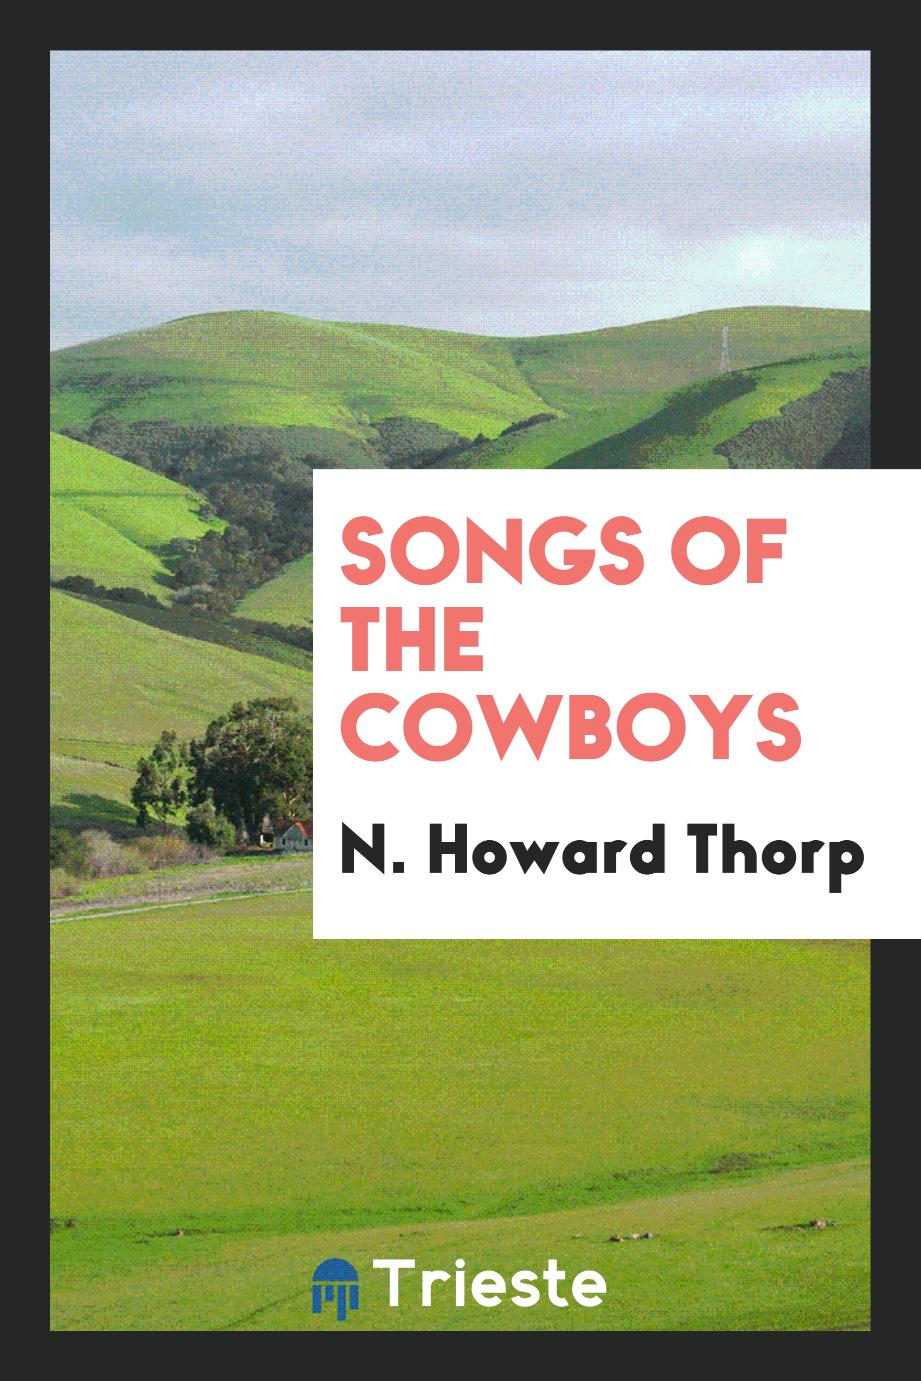 Songs of the cowboys